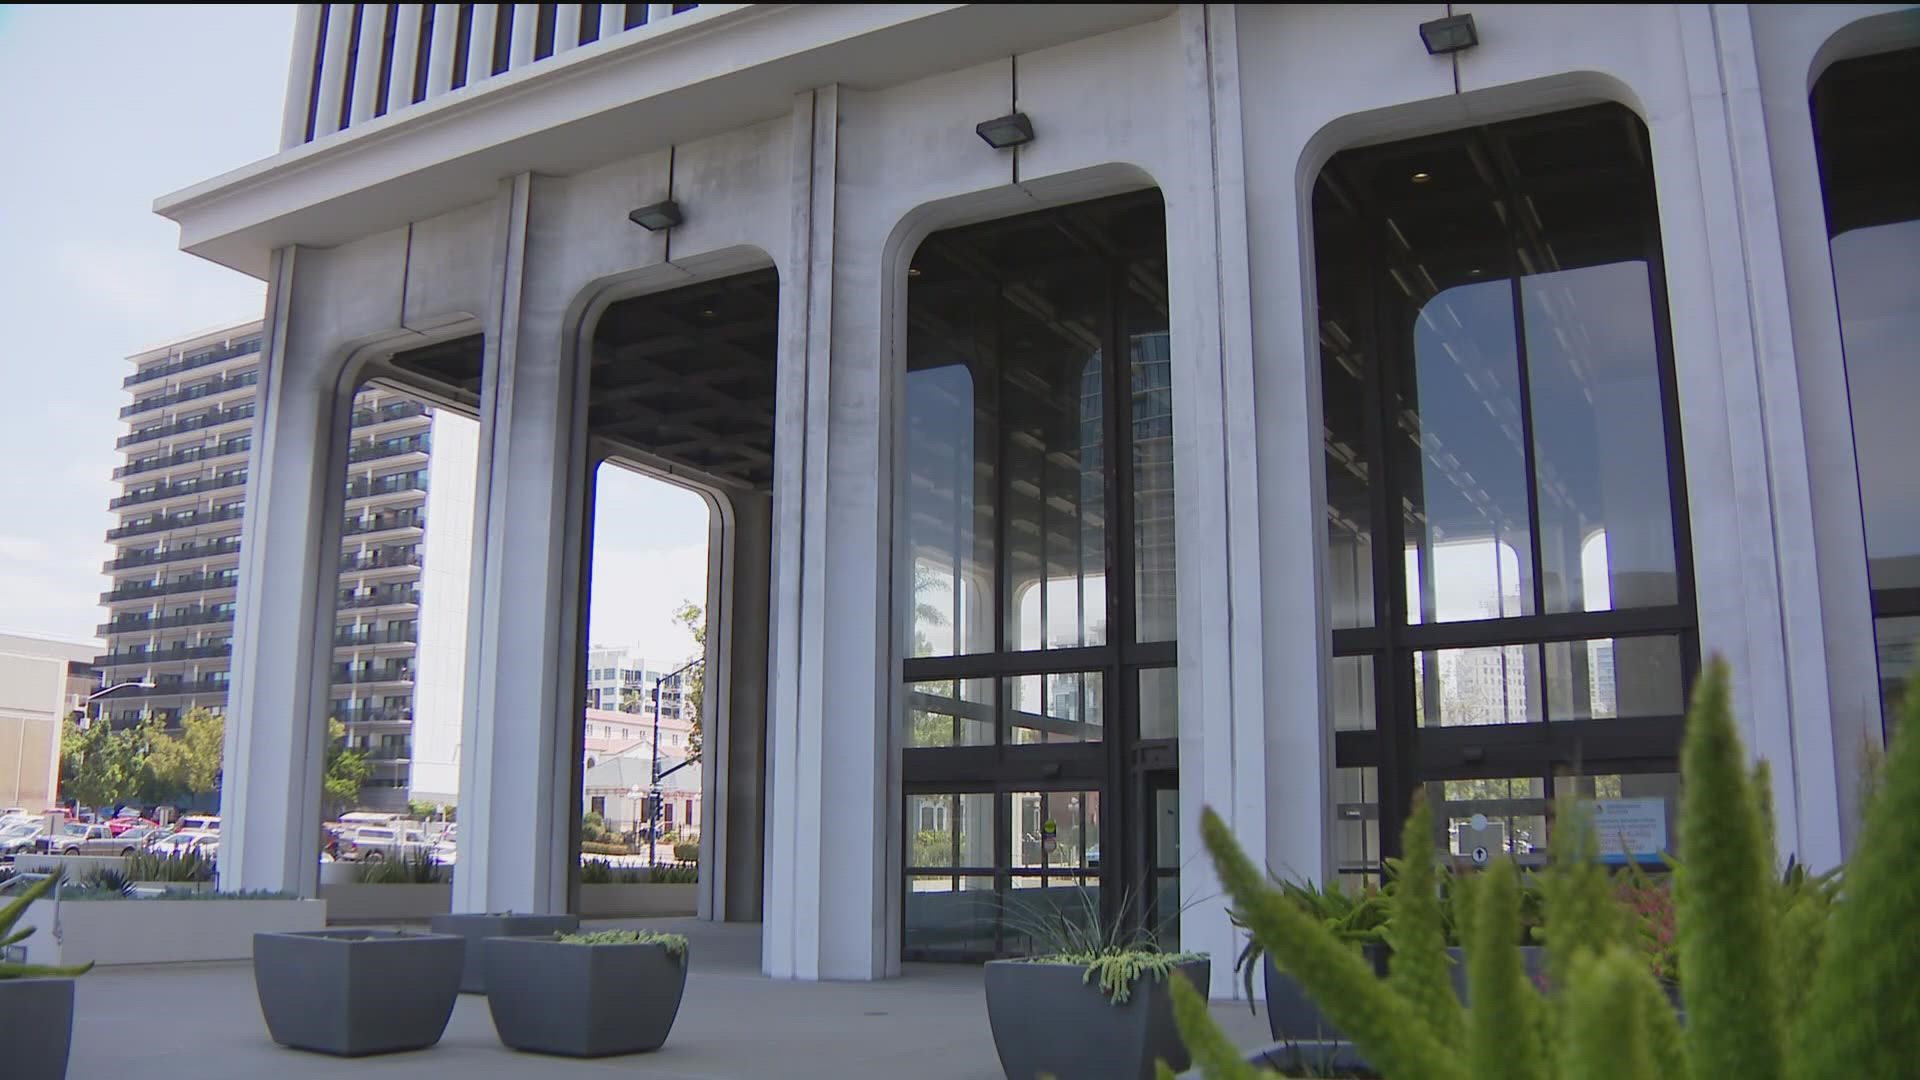 The settlement calls for the city of San Diego to buy 101 Ash for $86 million. The building has sat vacant for the exception of two weeks since 2017.